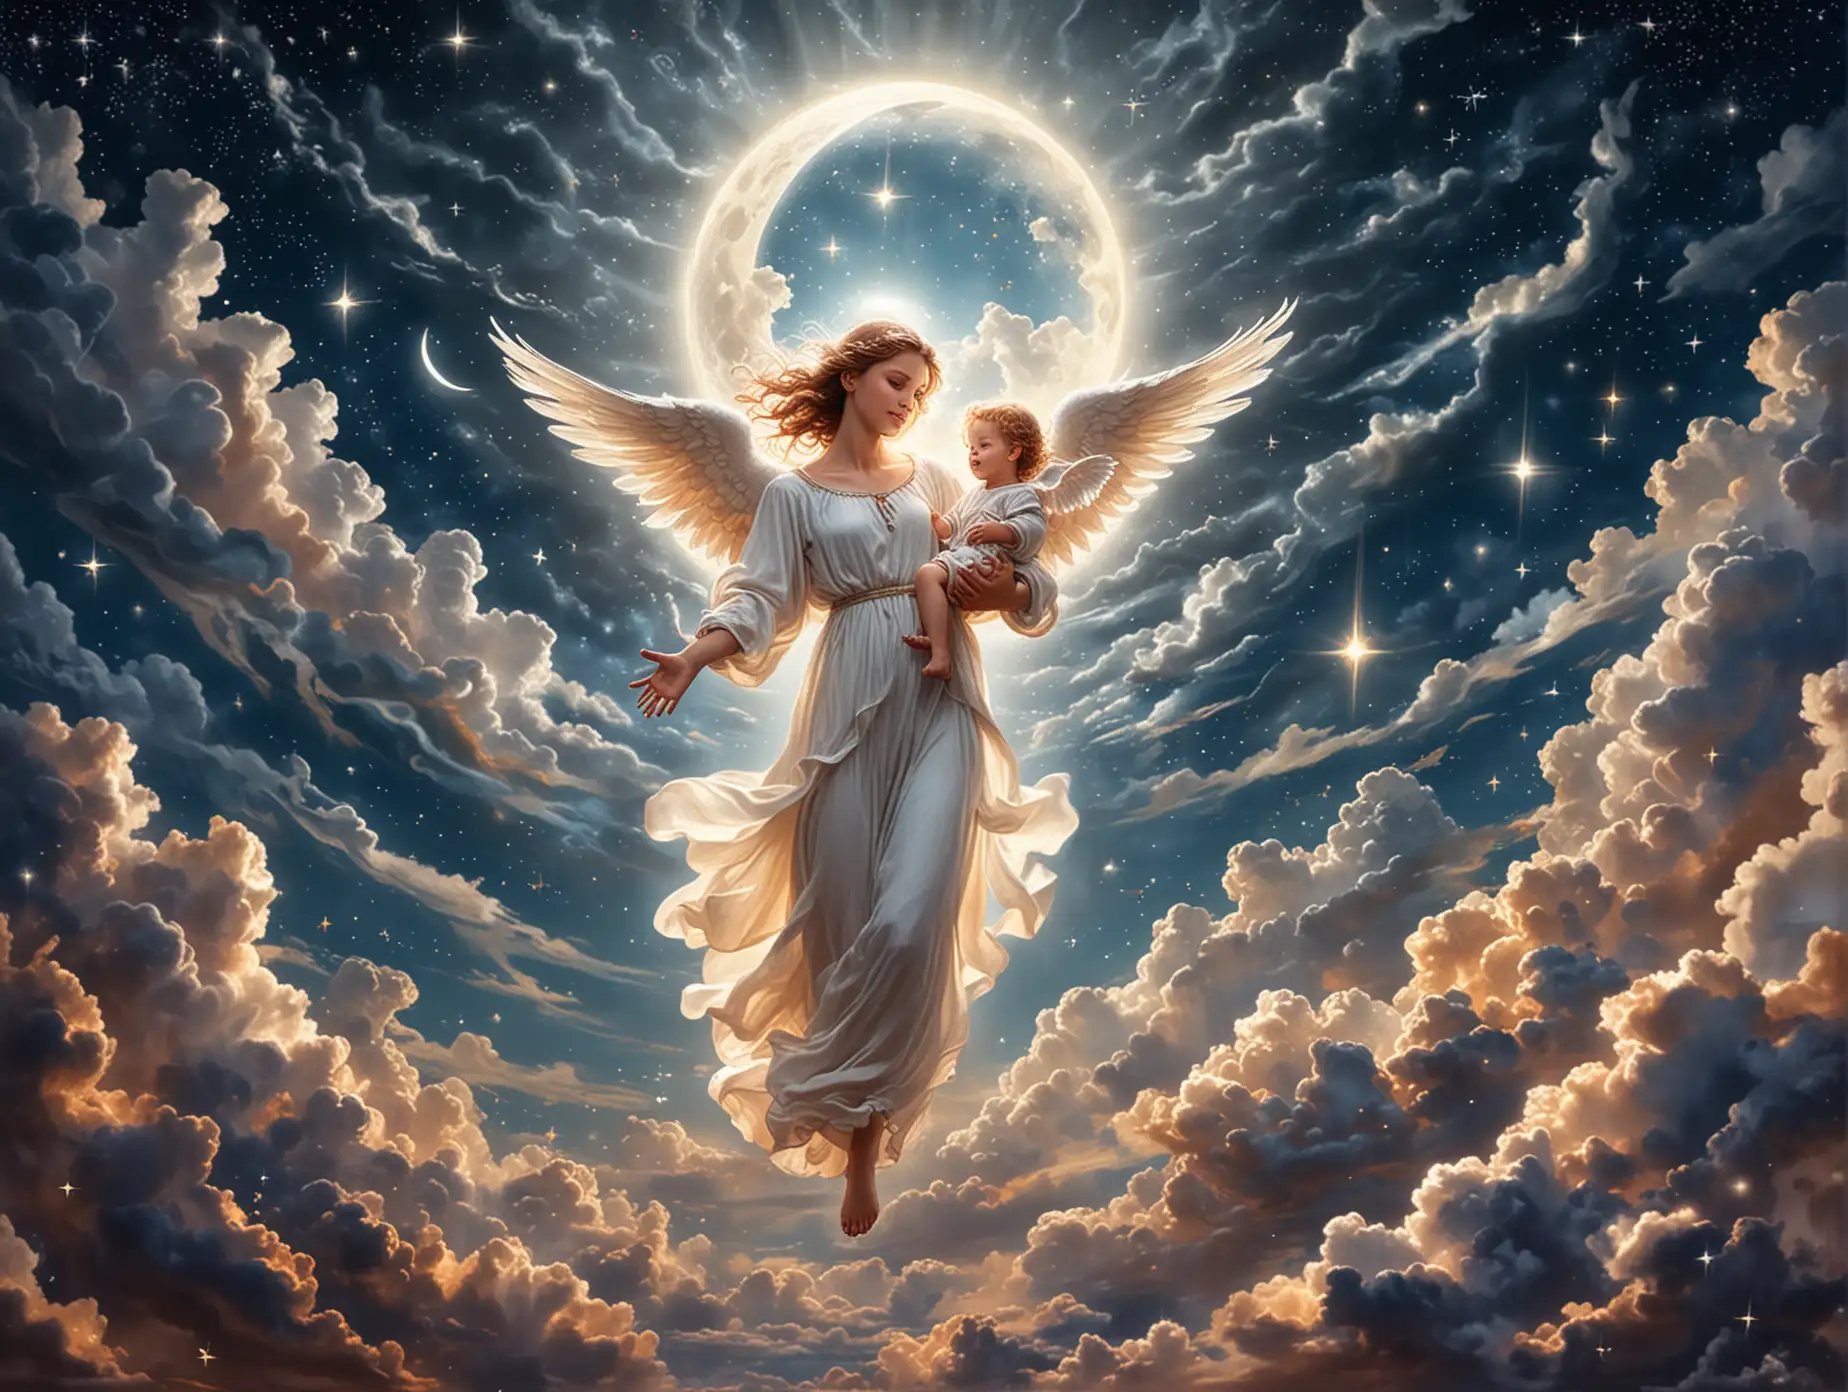 Angel-Flying-with-Child-under-Starry-Sky-and-Moonlight